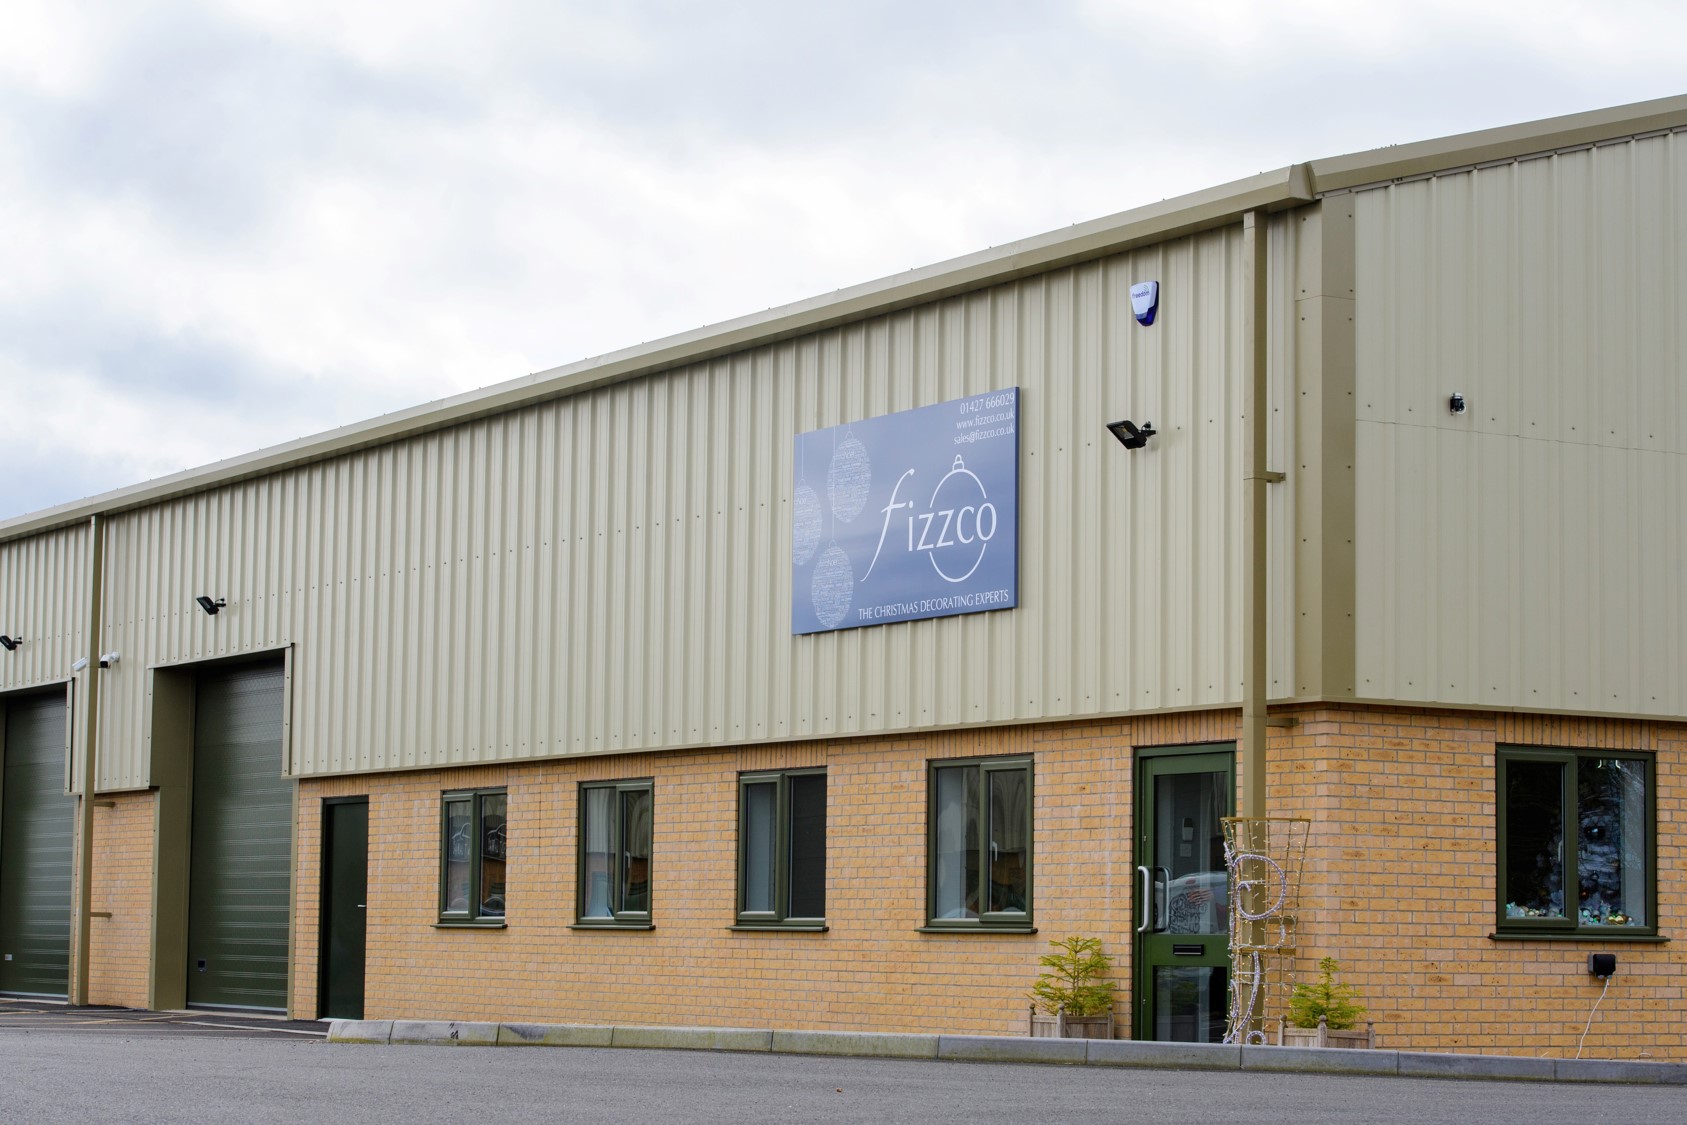 The outside of Fizzco's new and current head office.